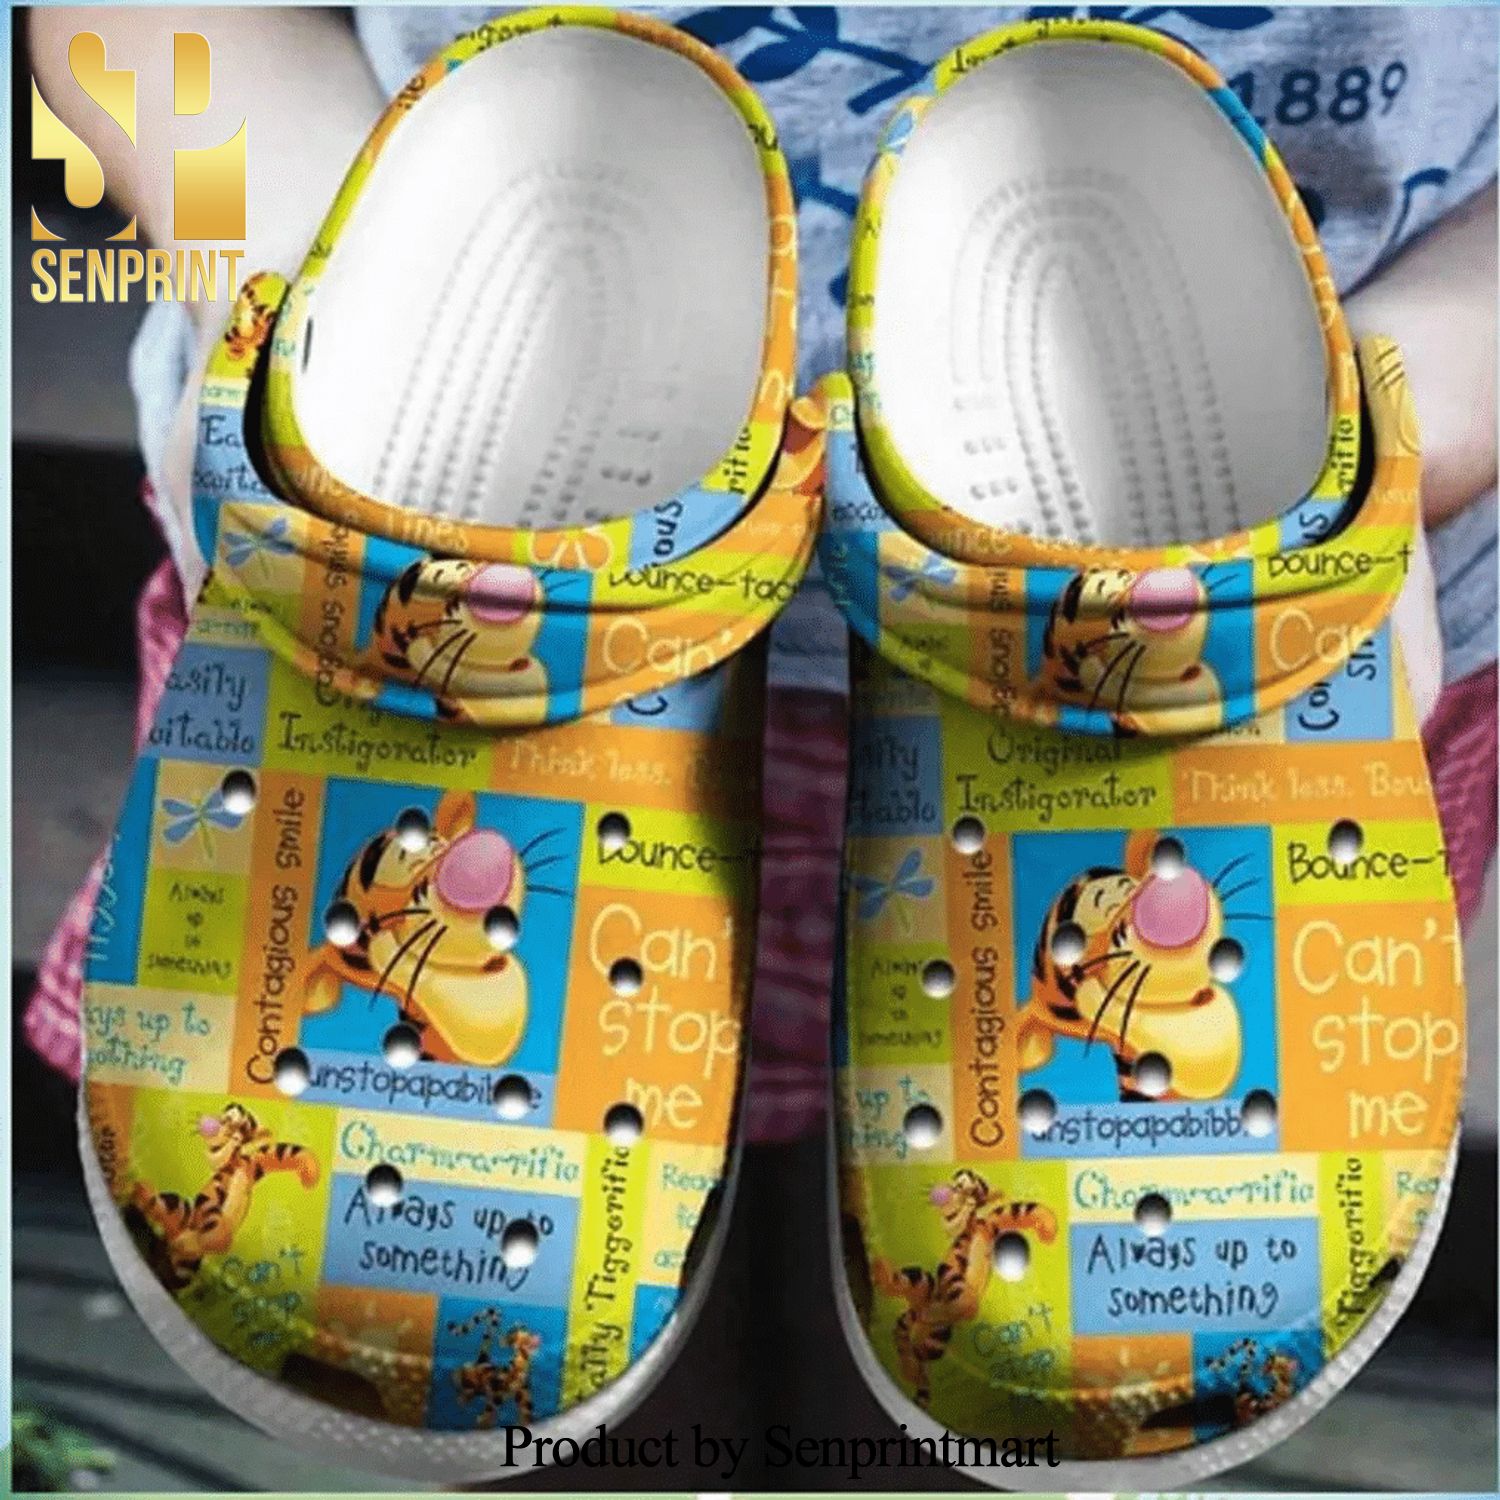 Tigger Winnie-The-Pooh 2 For Lover Hypebeast Fashion Crocs Sandals